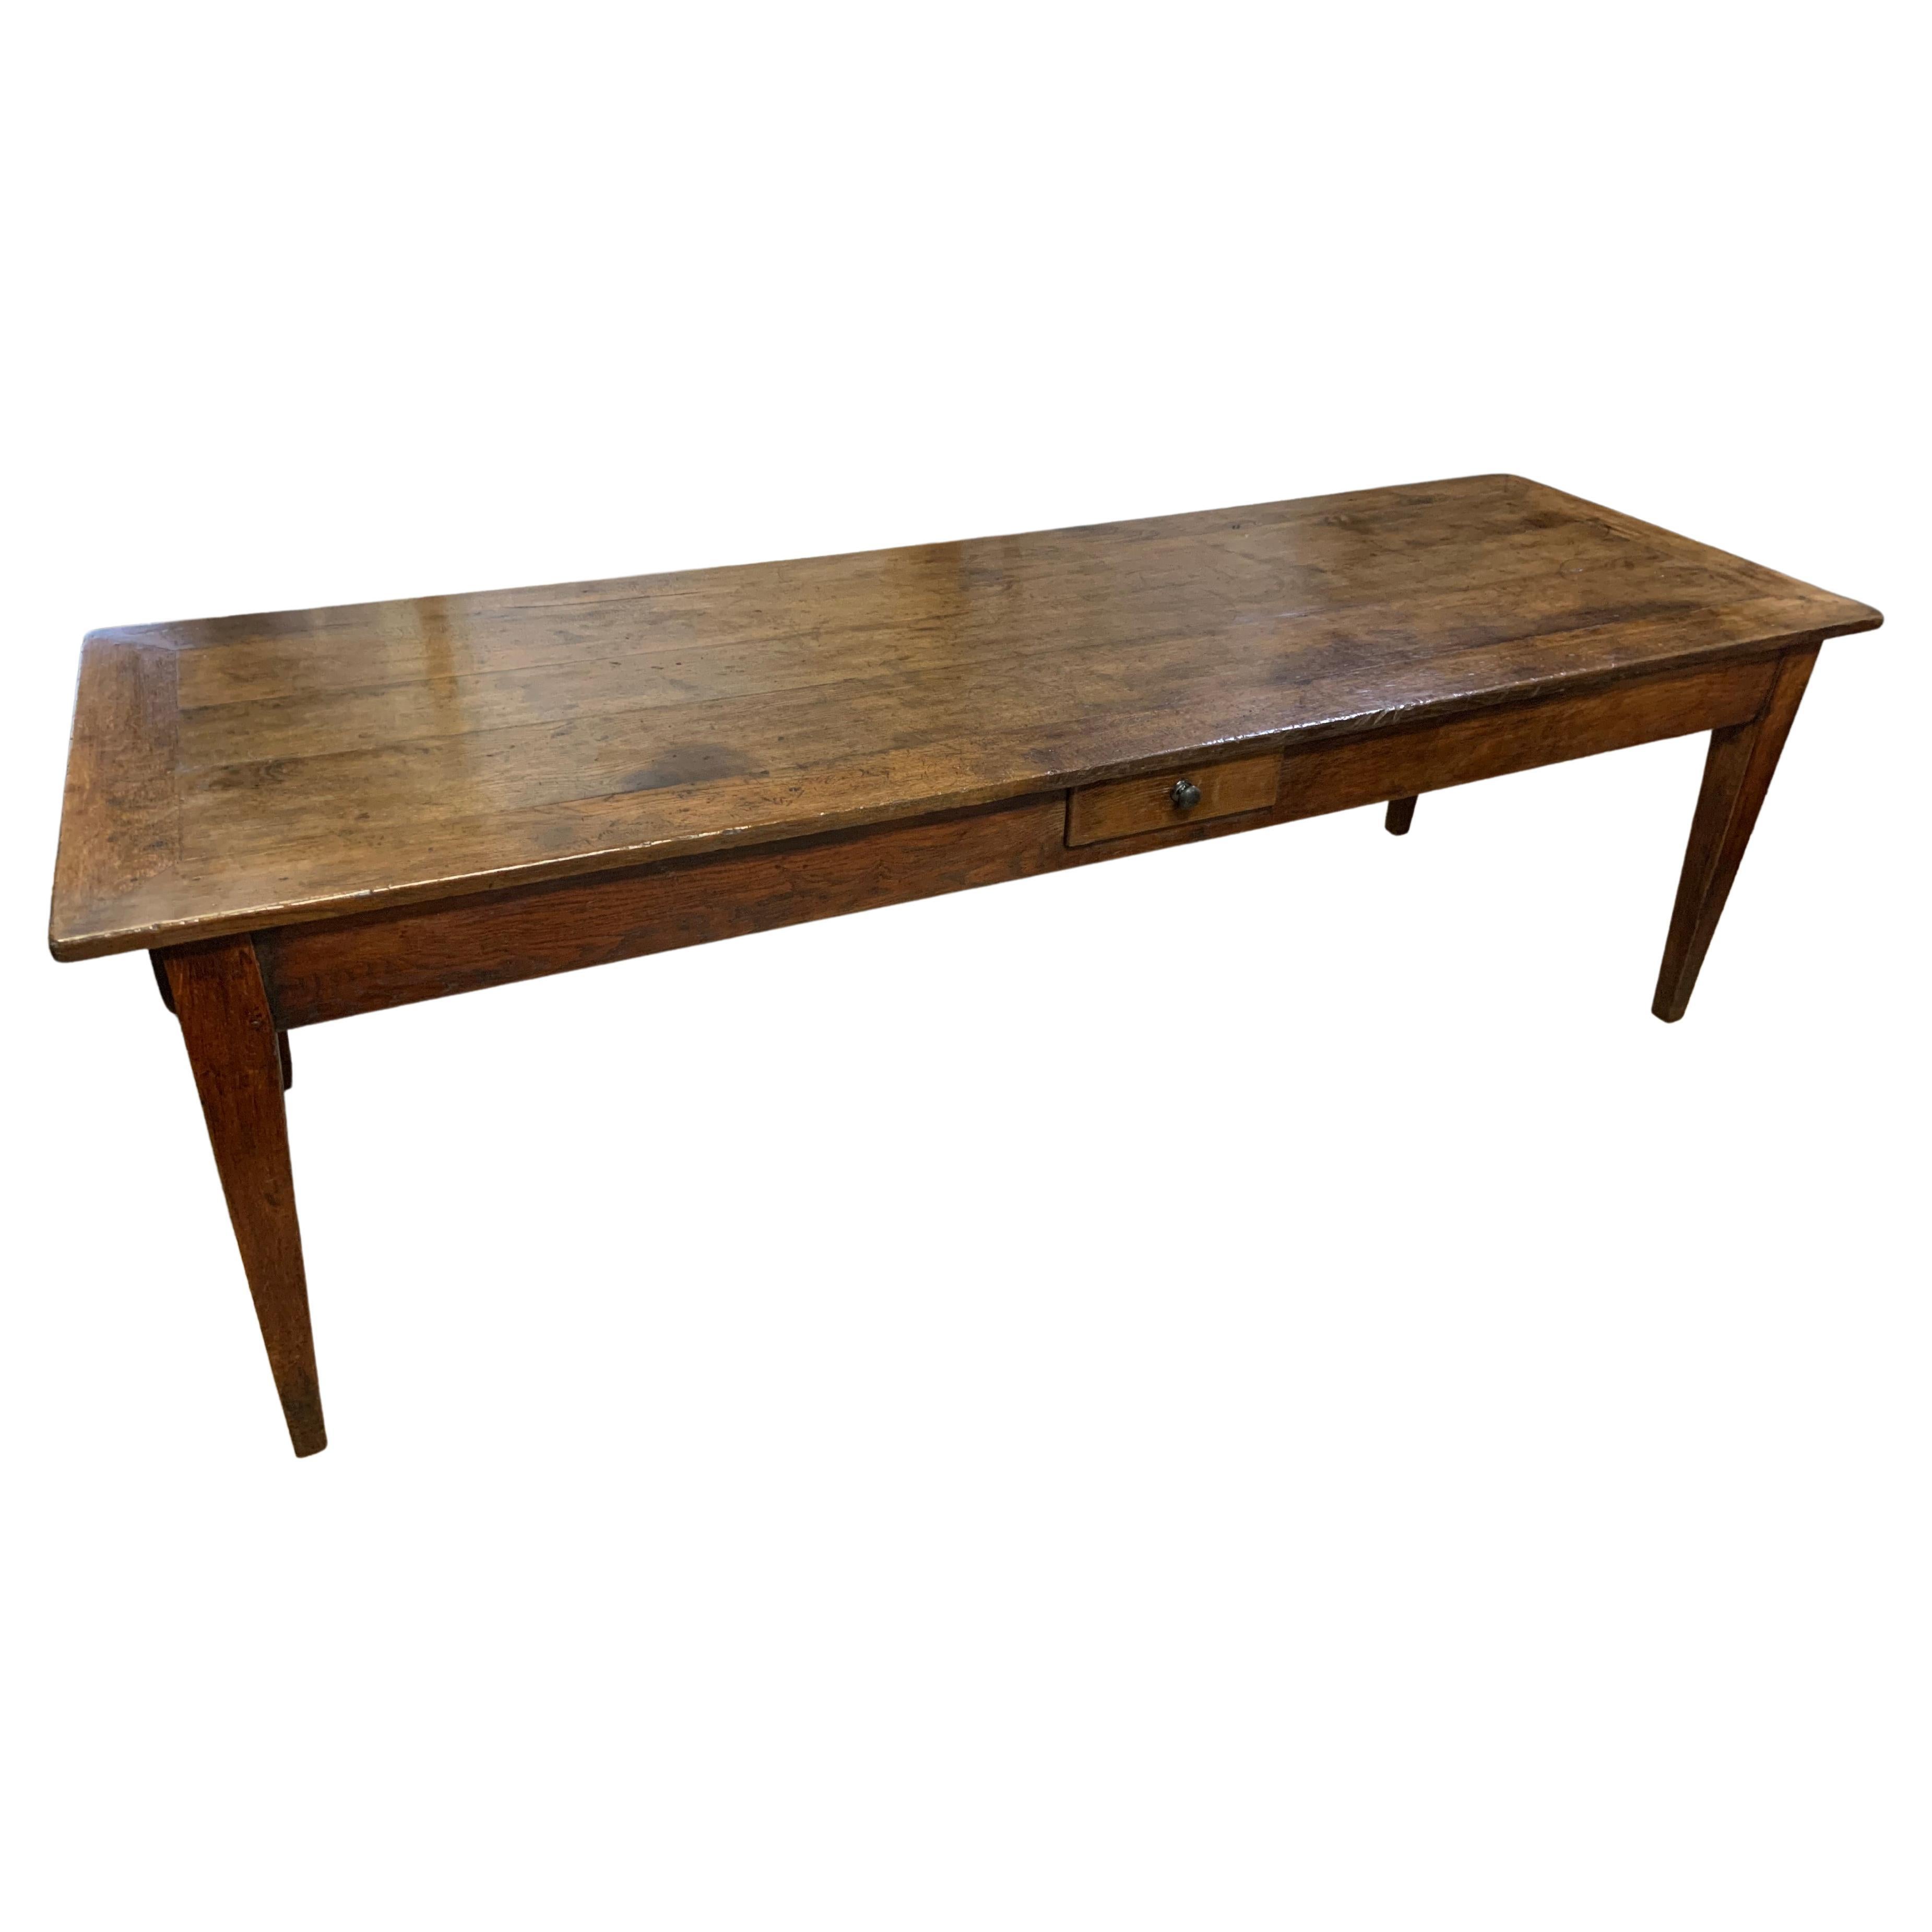 19th Century Oak Dining Table With Two Drawers and Tapered Legs